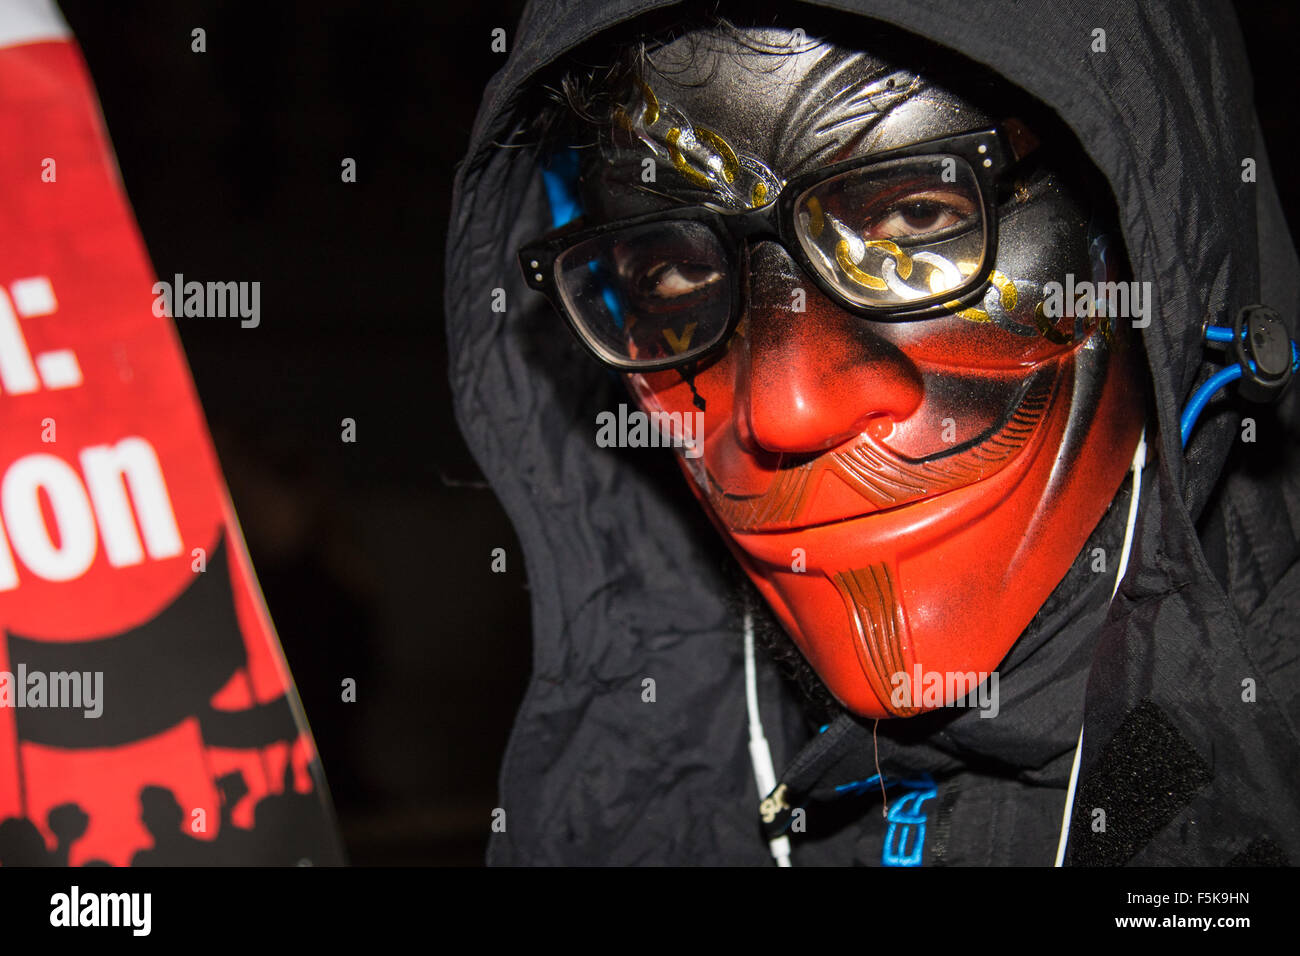 London, November 5th 2015.  Anarchists and anti-establishment activists hold their annual Million Mask March on Guy Fawkes night, enduring rain and a heavy police presence. The marches origins lie with the online activism group Anonymous. Credit:  Paul Davey/Alamy Live News Stock Photo